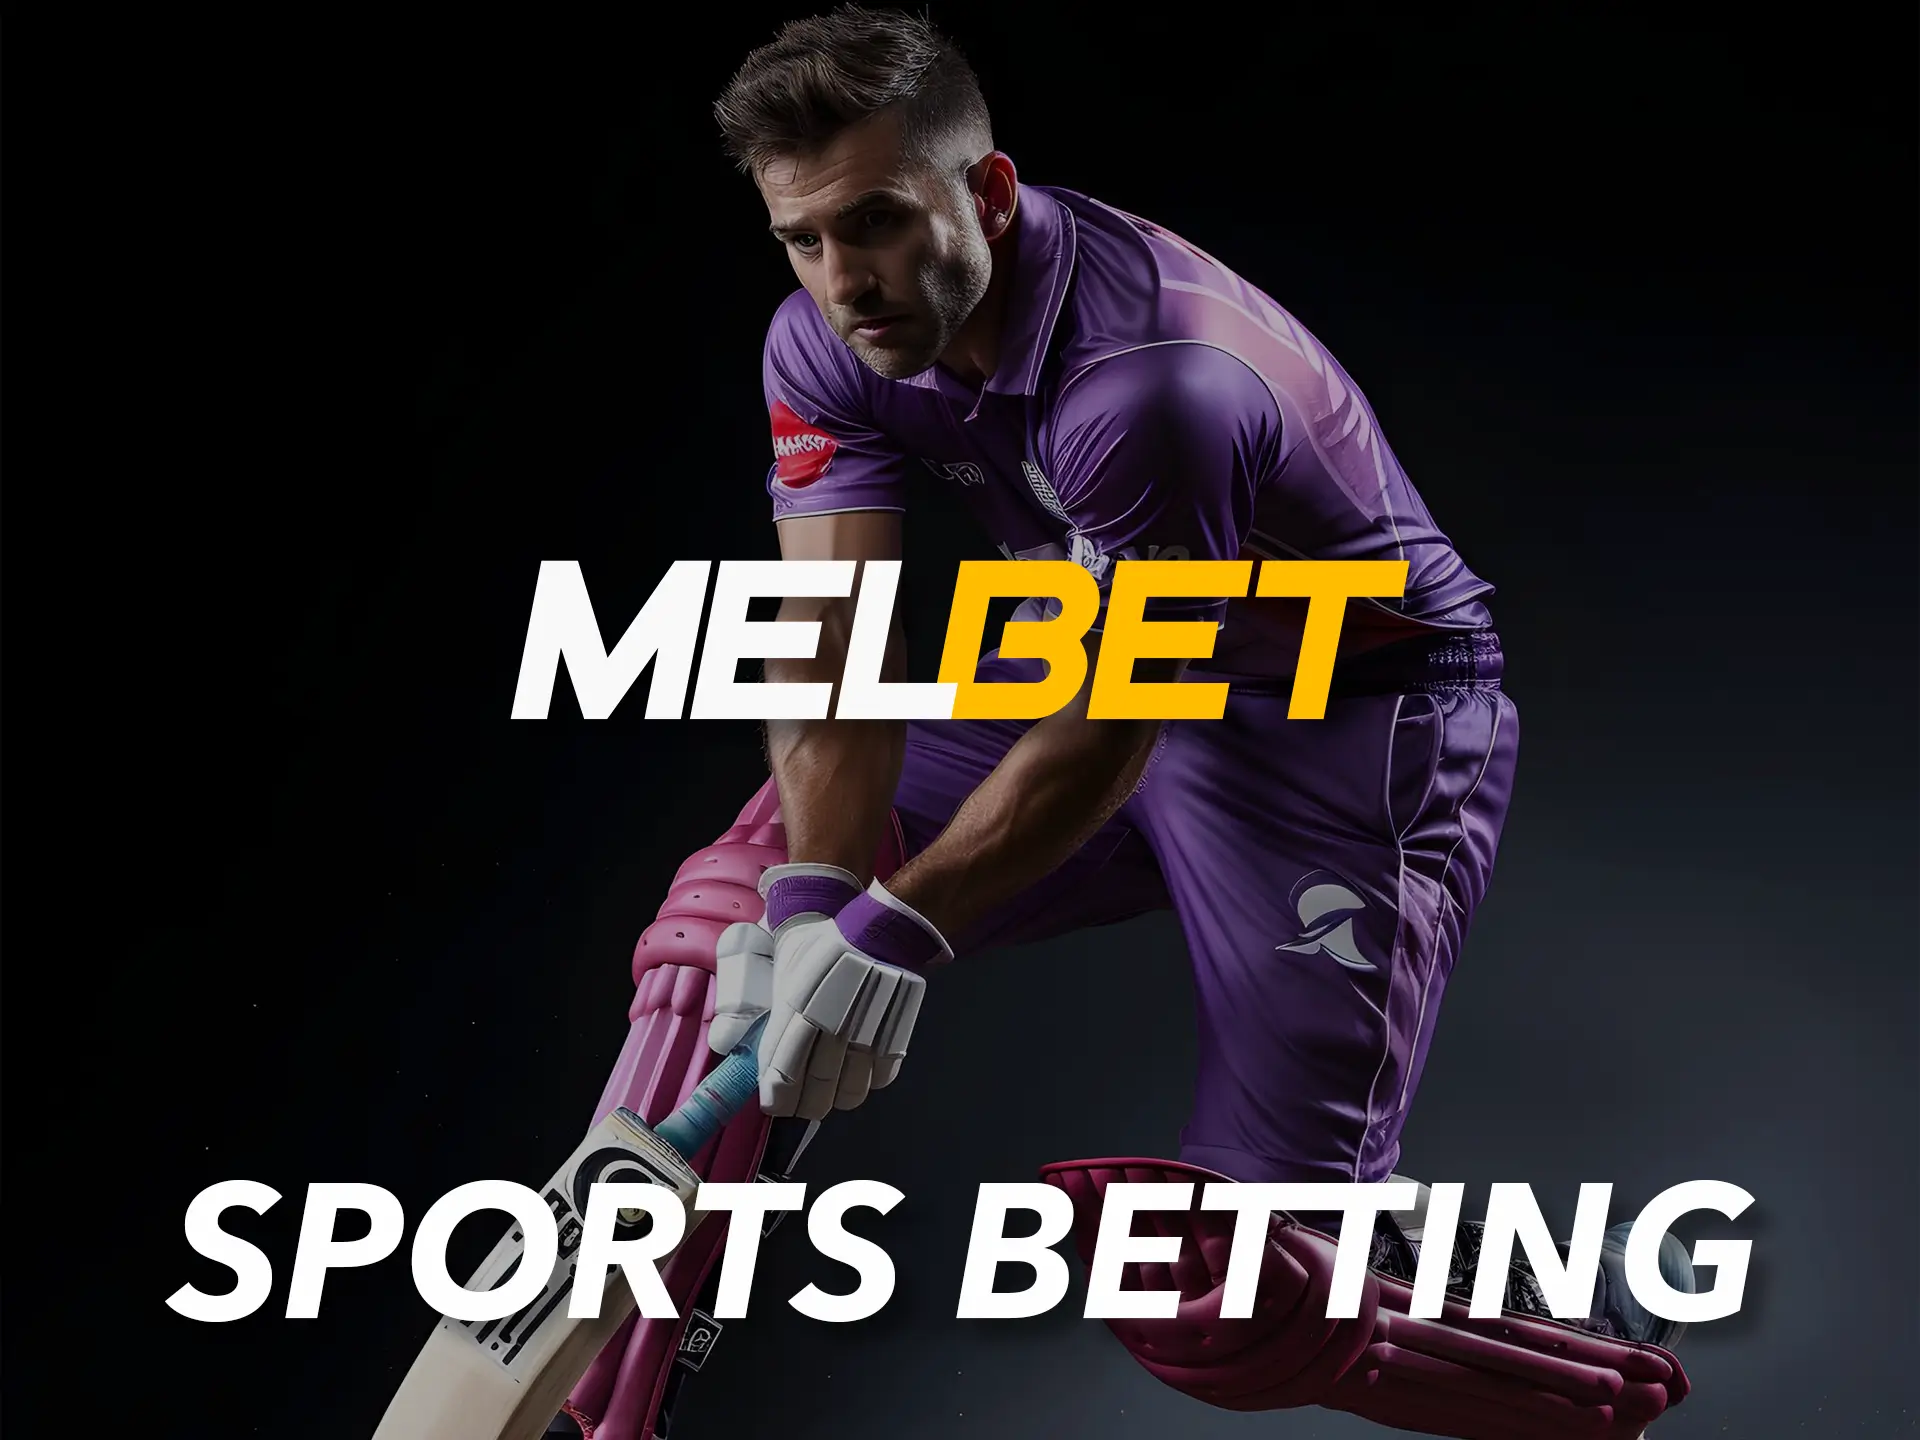 A wide range of sports disciplines will not leave any Melbet customer indifferent.